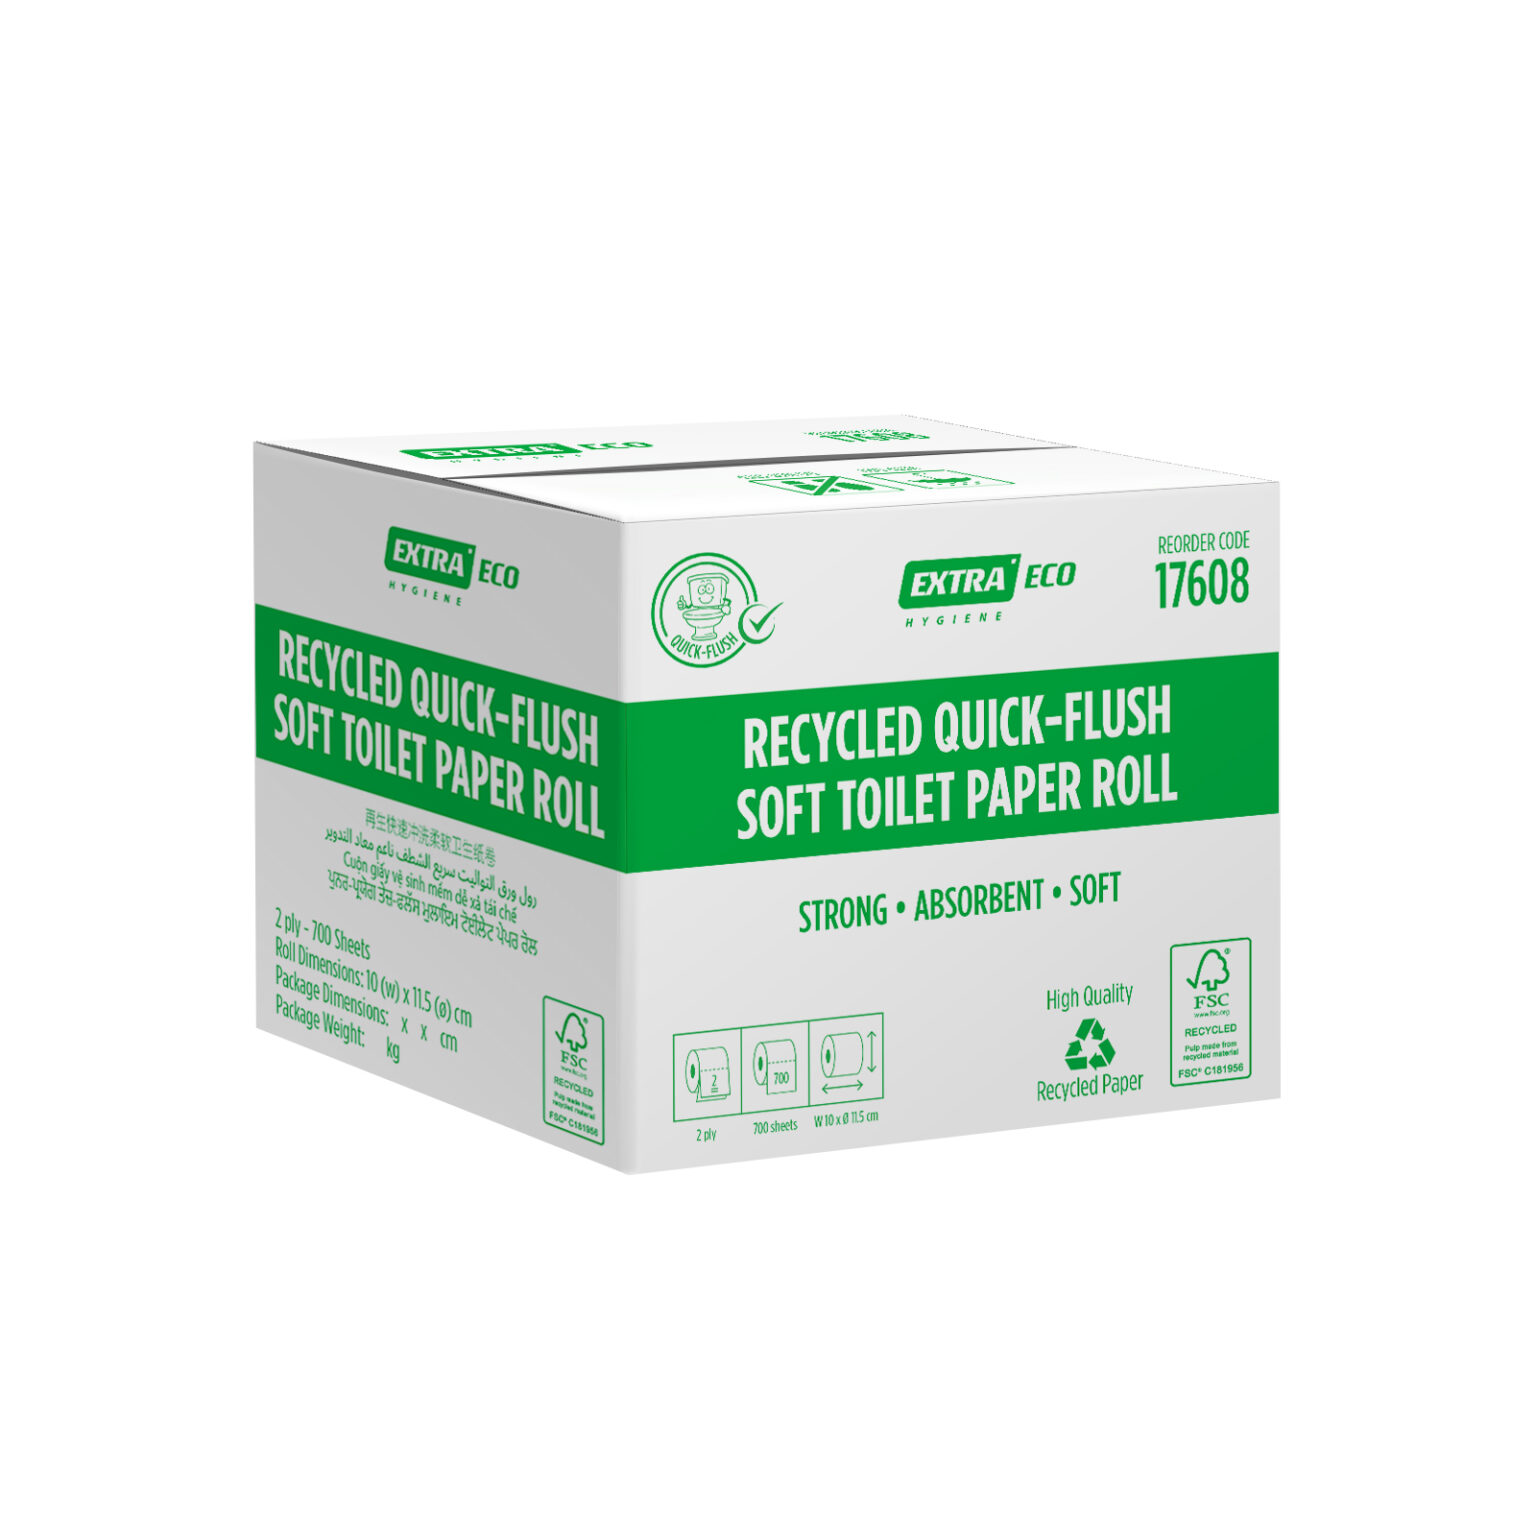 17608 Recycled quick flush soft toilet paper roll